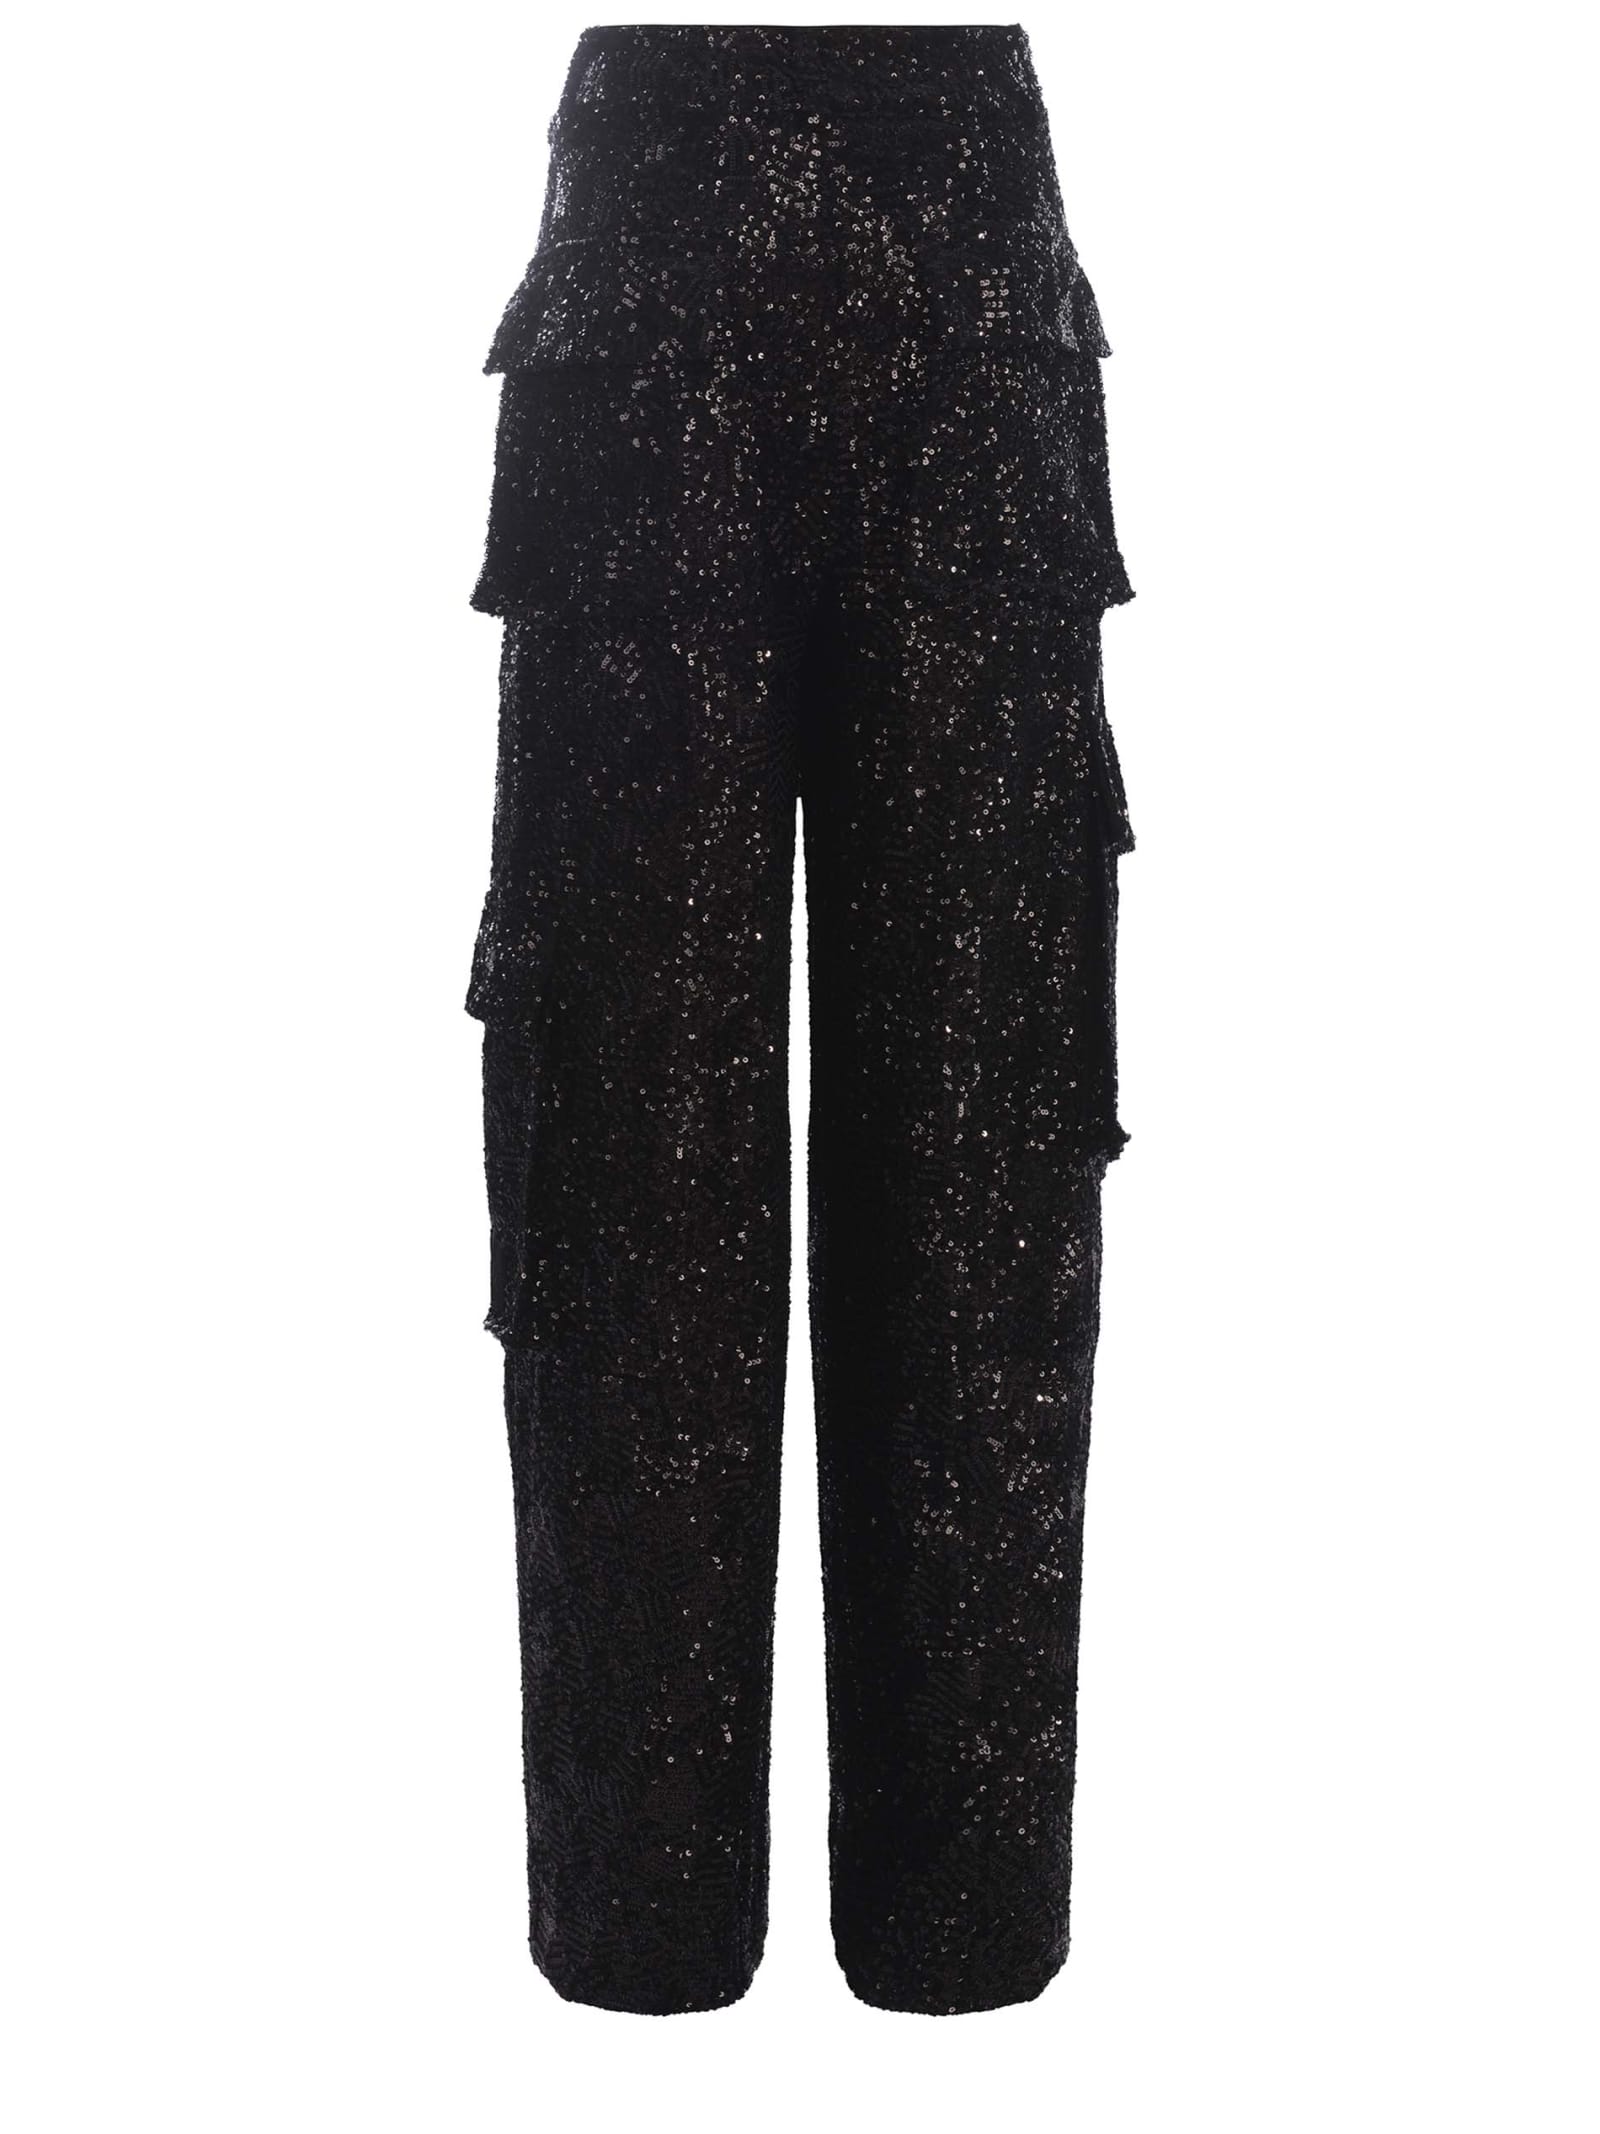 Shop Rotate Birger Christensen Trousers Rotate Made With Sequins In Nero